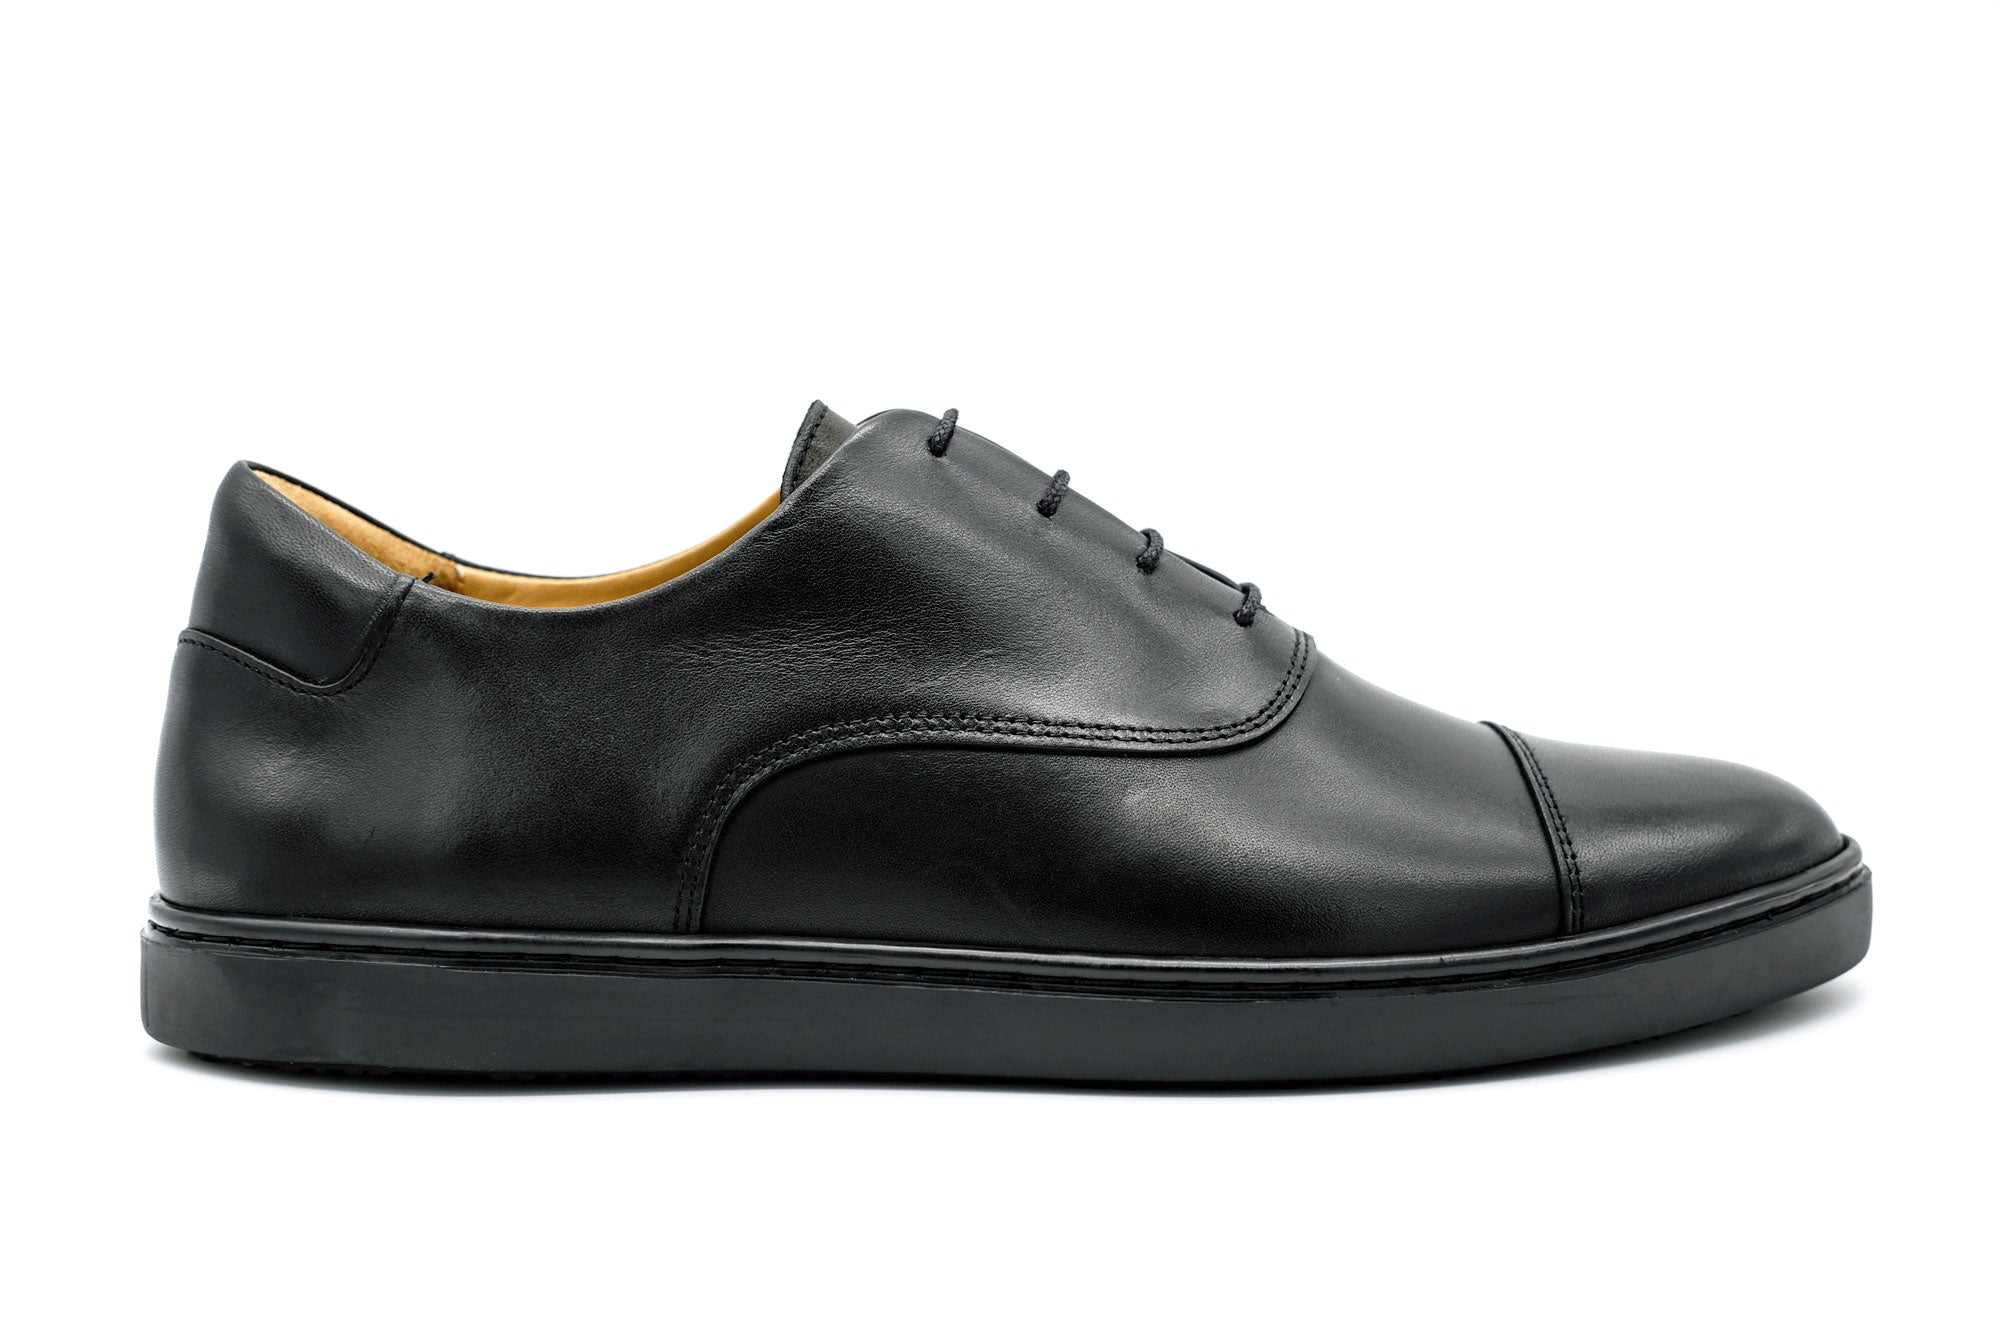 Kvalifikation pølse Pick up blade The Sneaker Disguised As A Dress Shoe